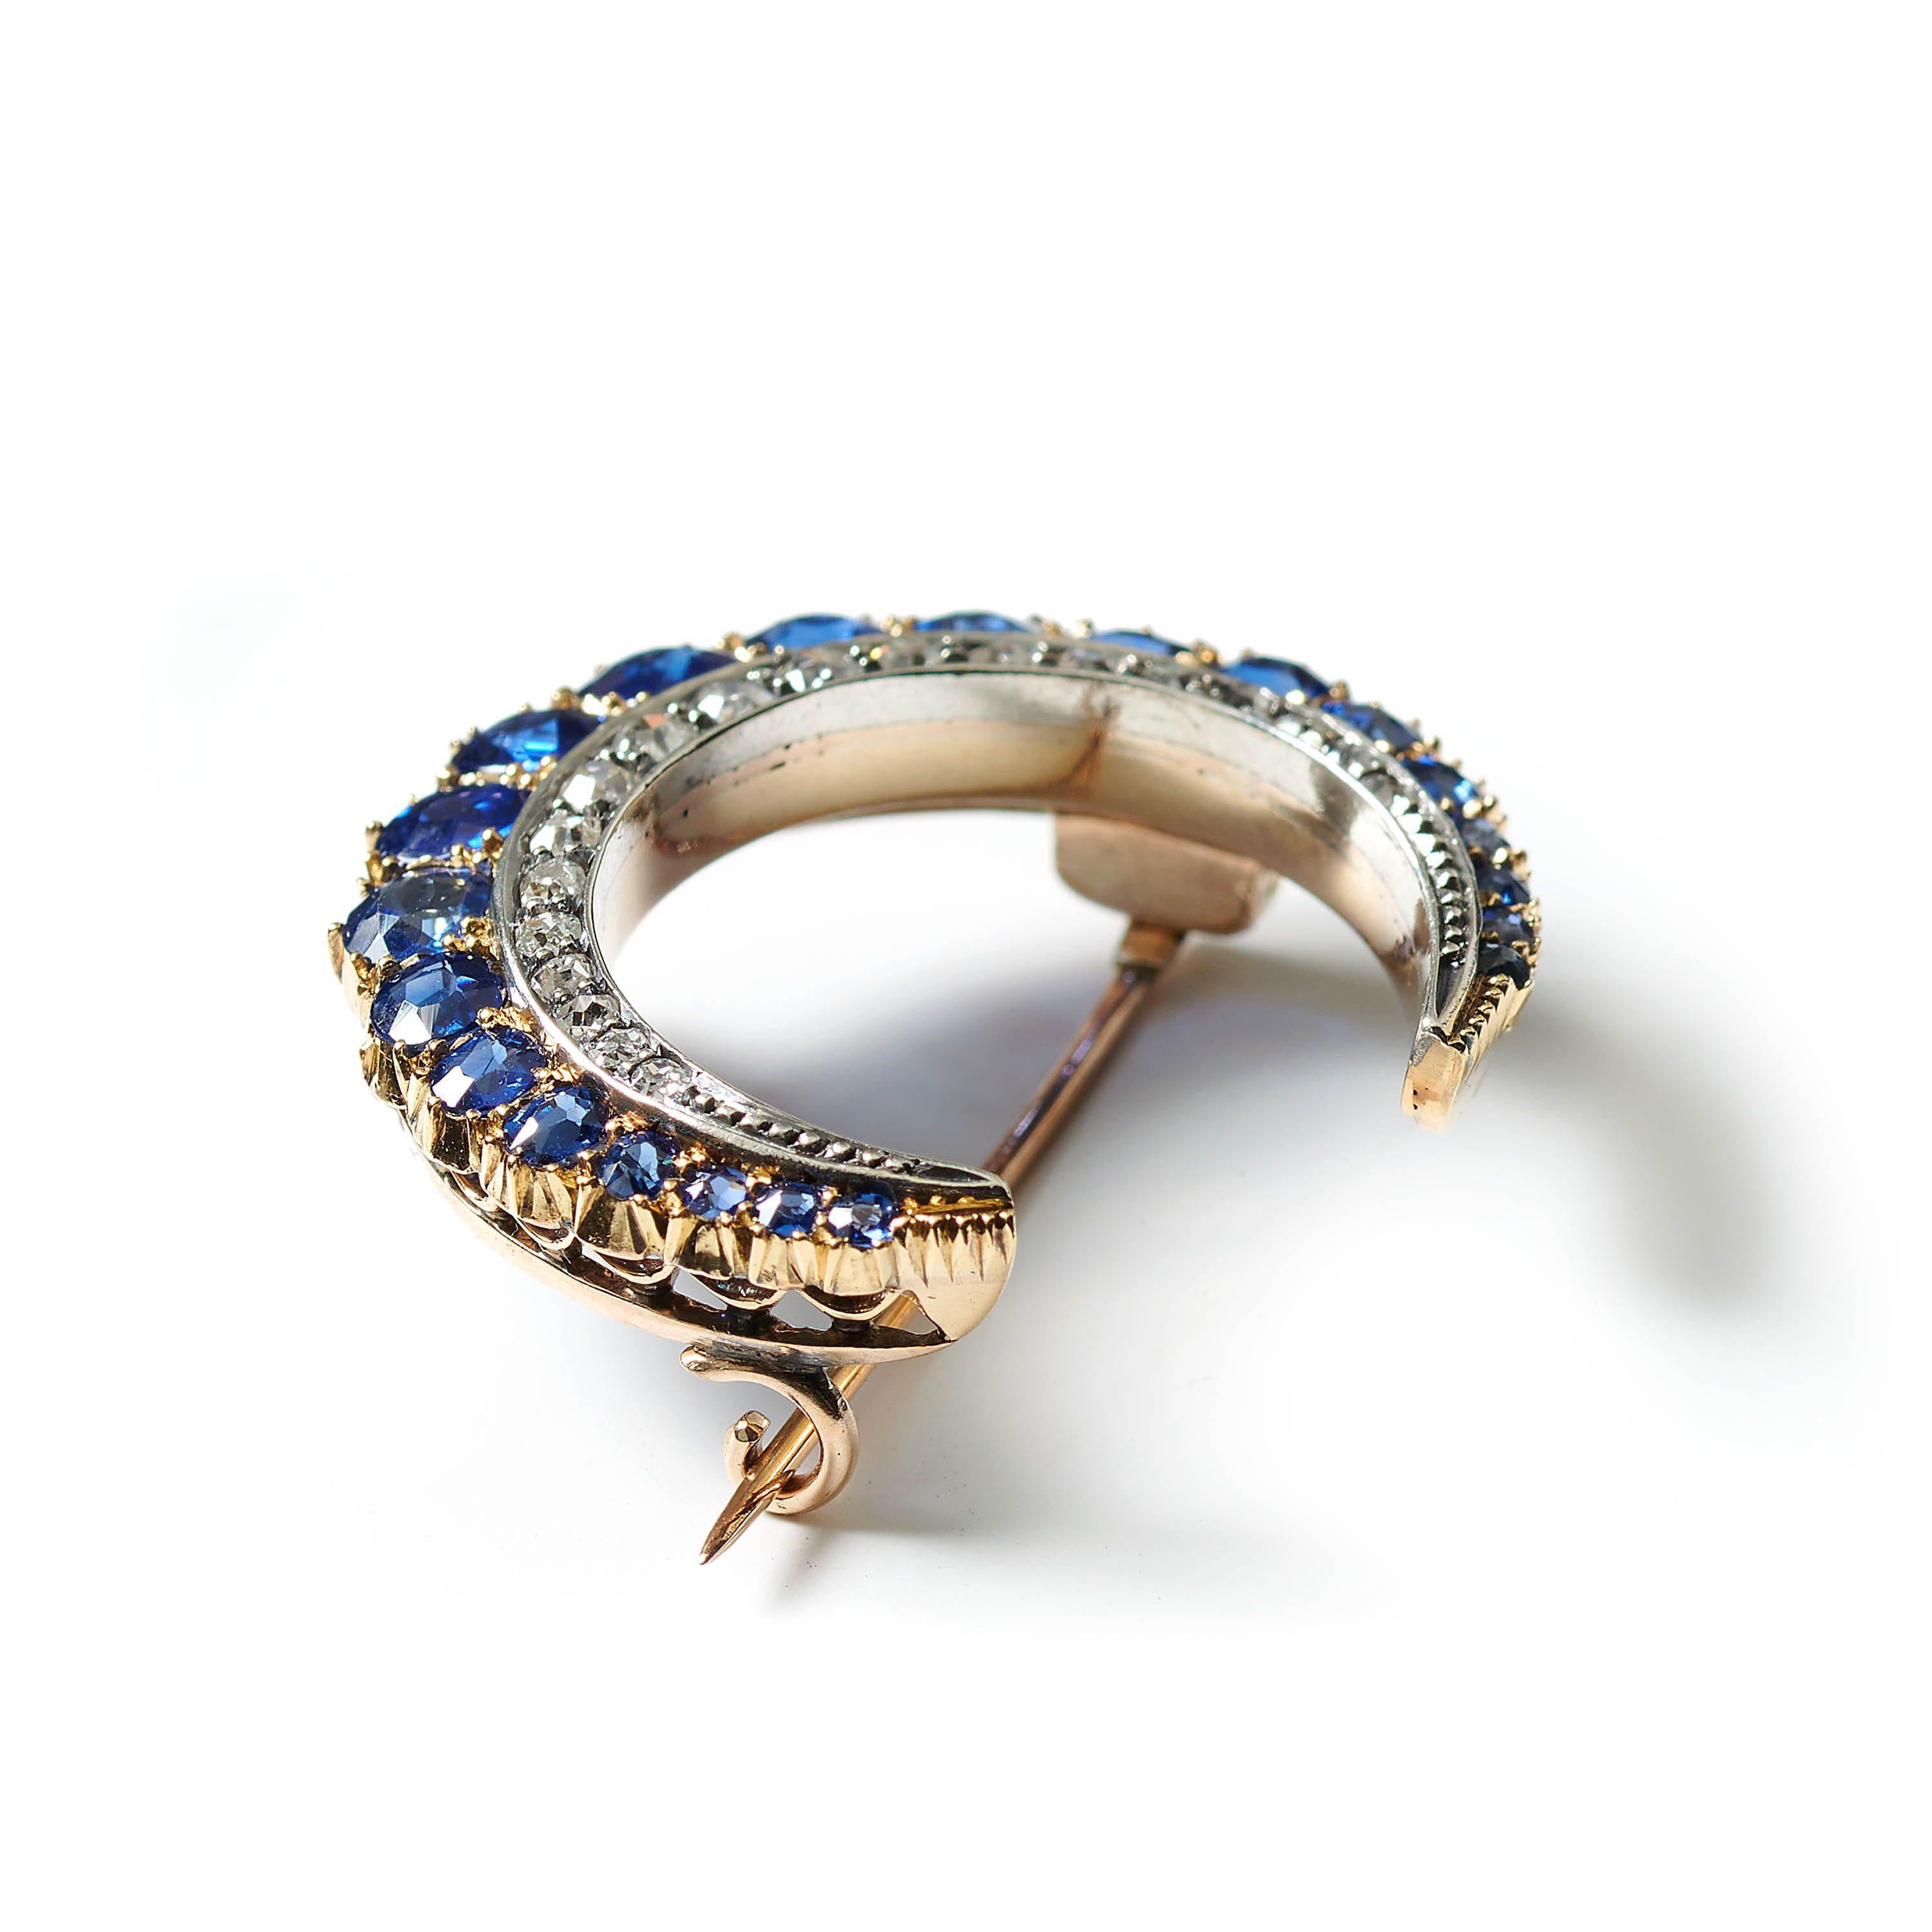 An antique sapphire and diamond crescent brooch, with an outer row of oval and cushion faceted sapphires, graduating from the centre, set in gold, in grains and cut down settings on the outer edge and a gold pierced gallery below, with an inner row